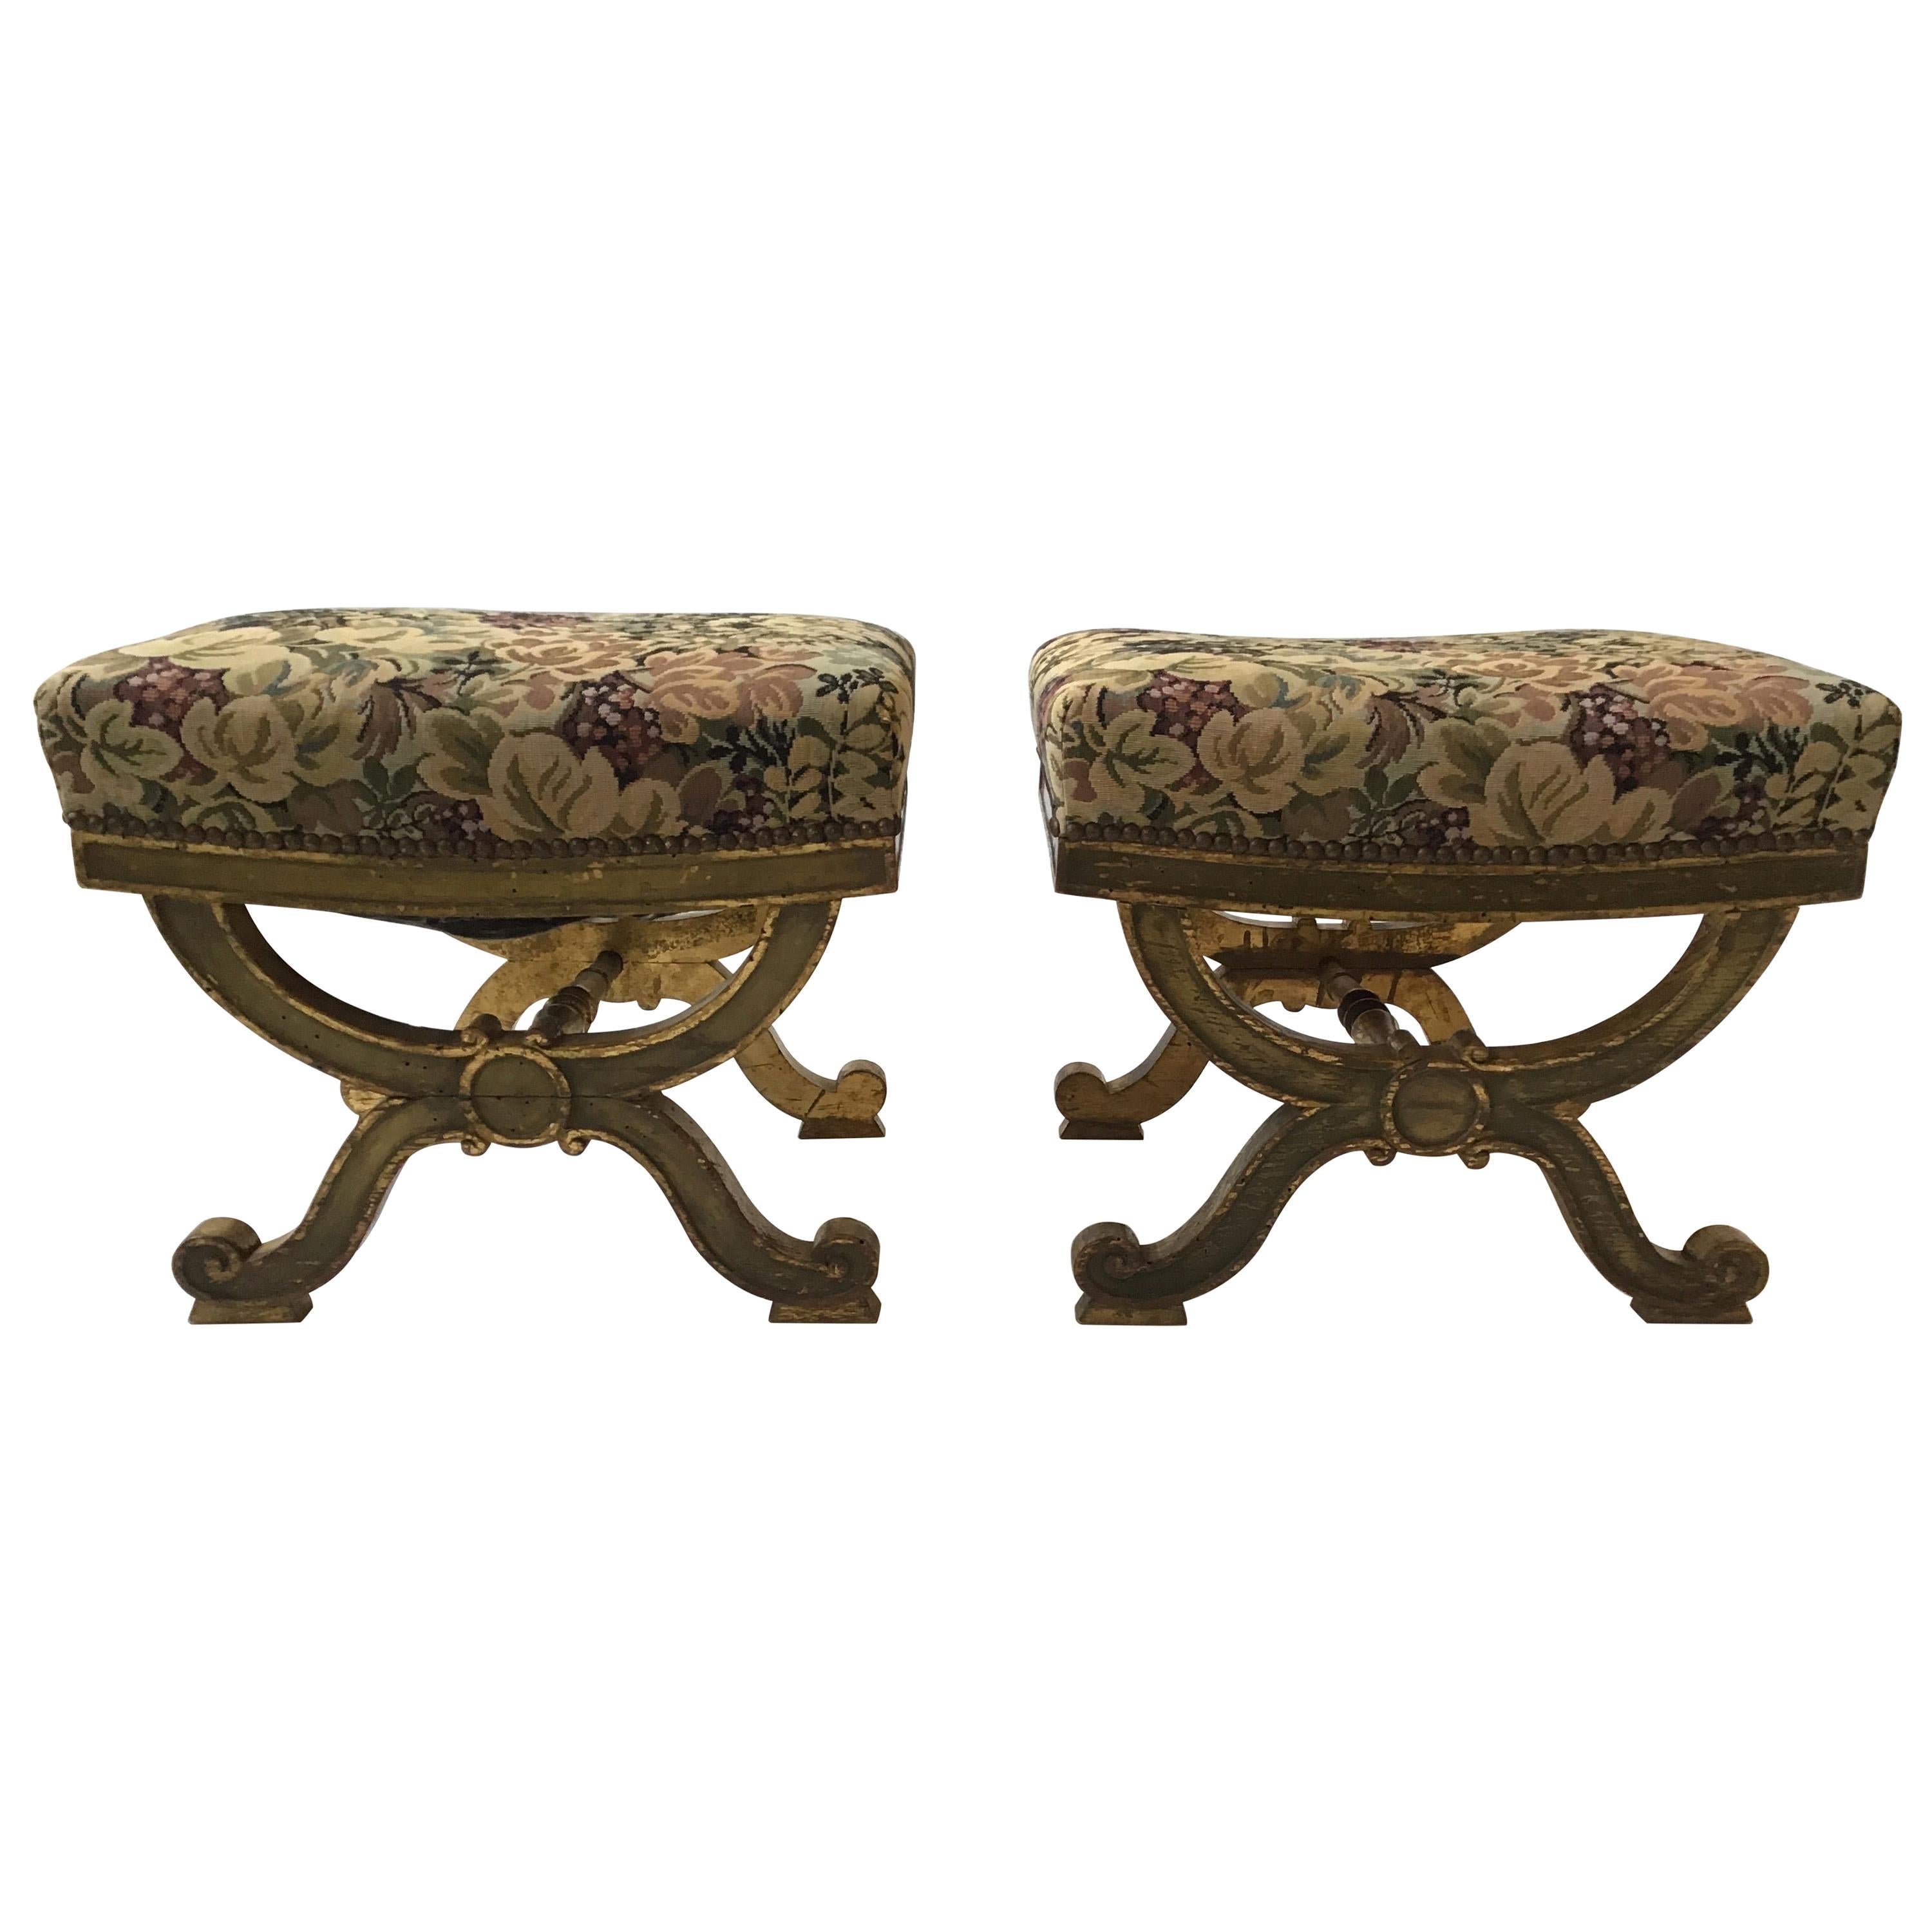 Pair of 1890s Italian Classical Giltwood Benches